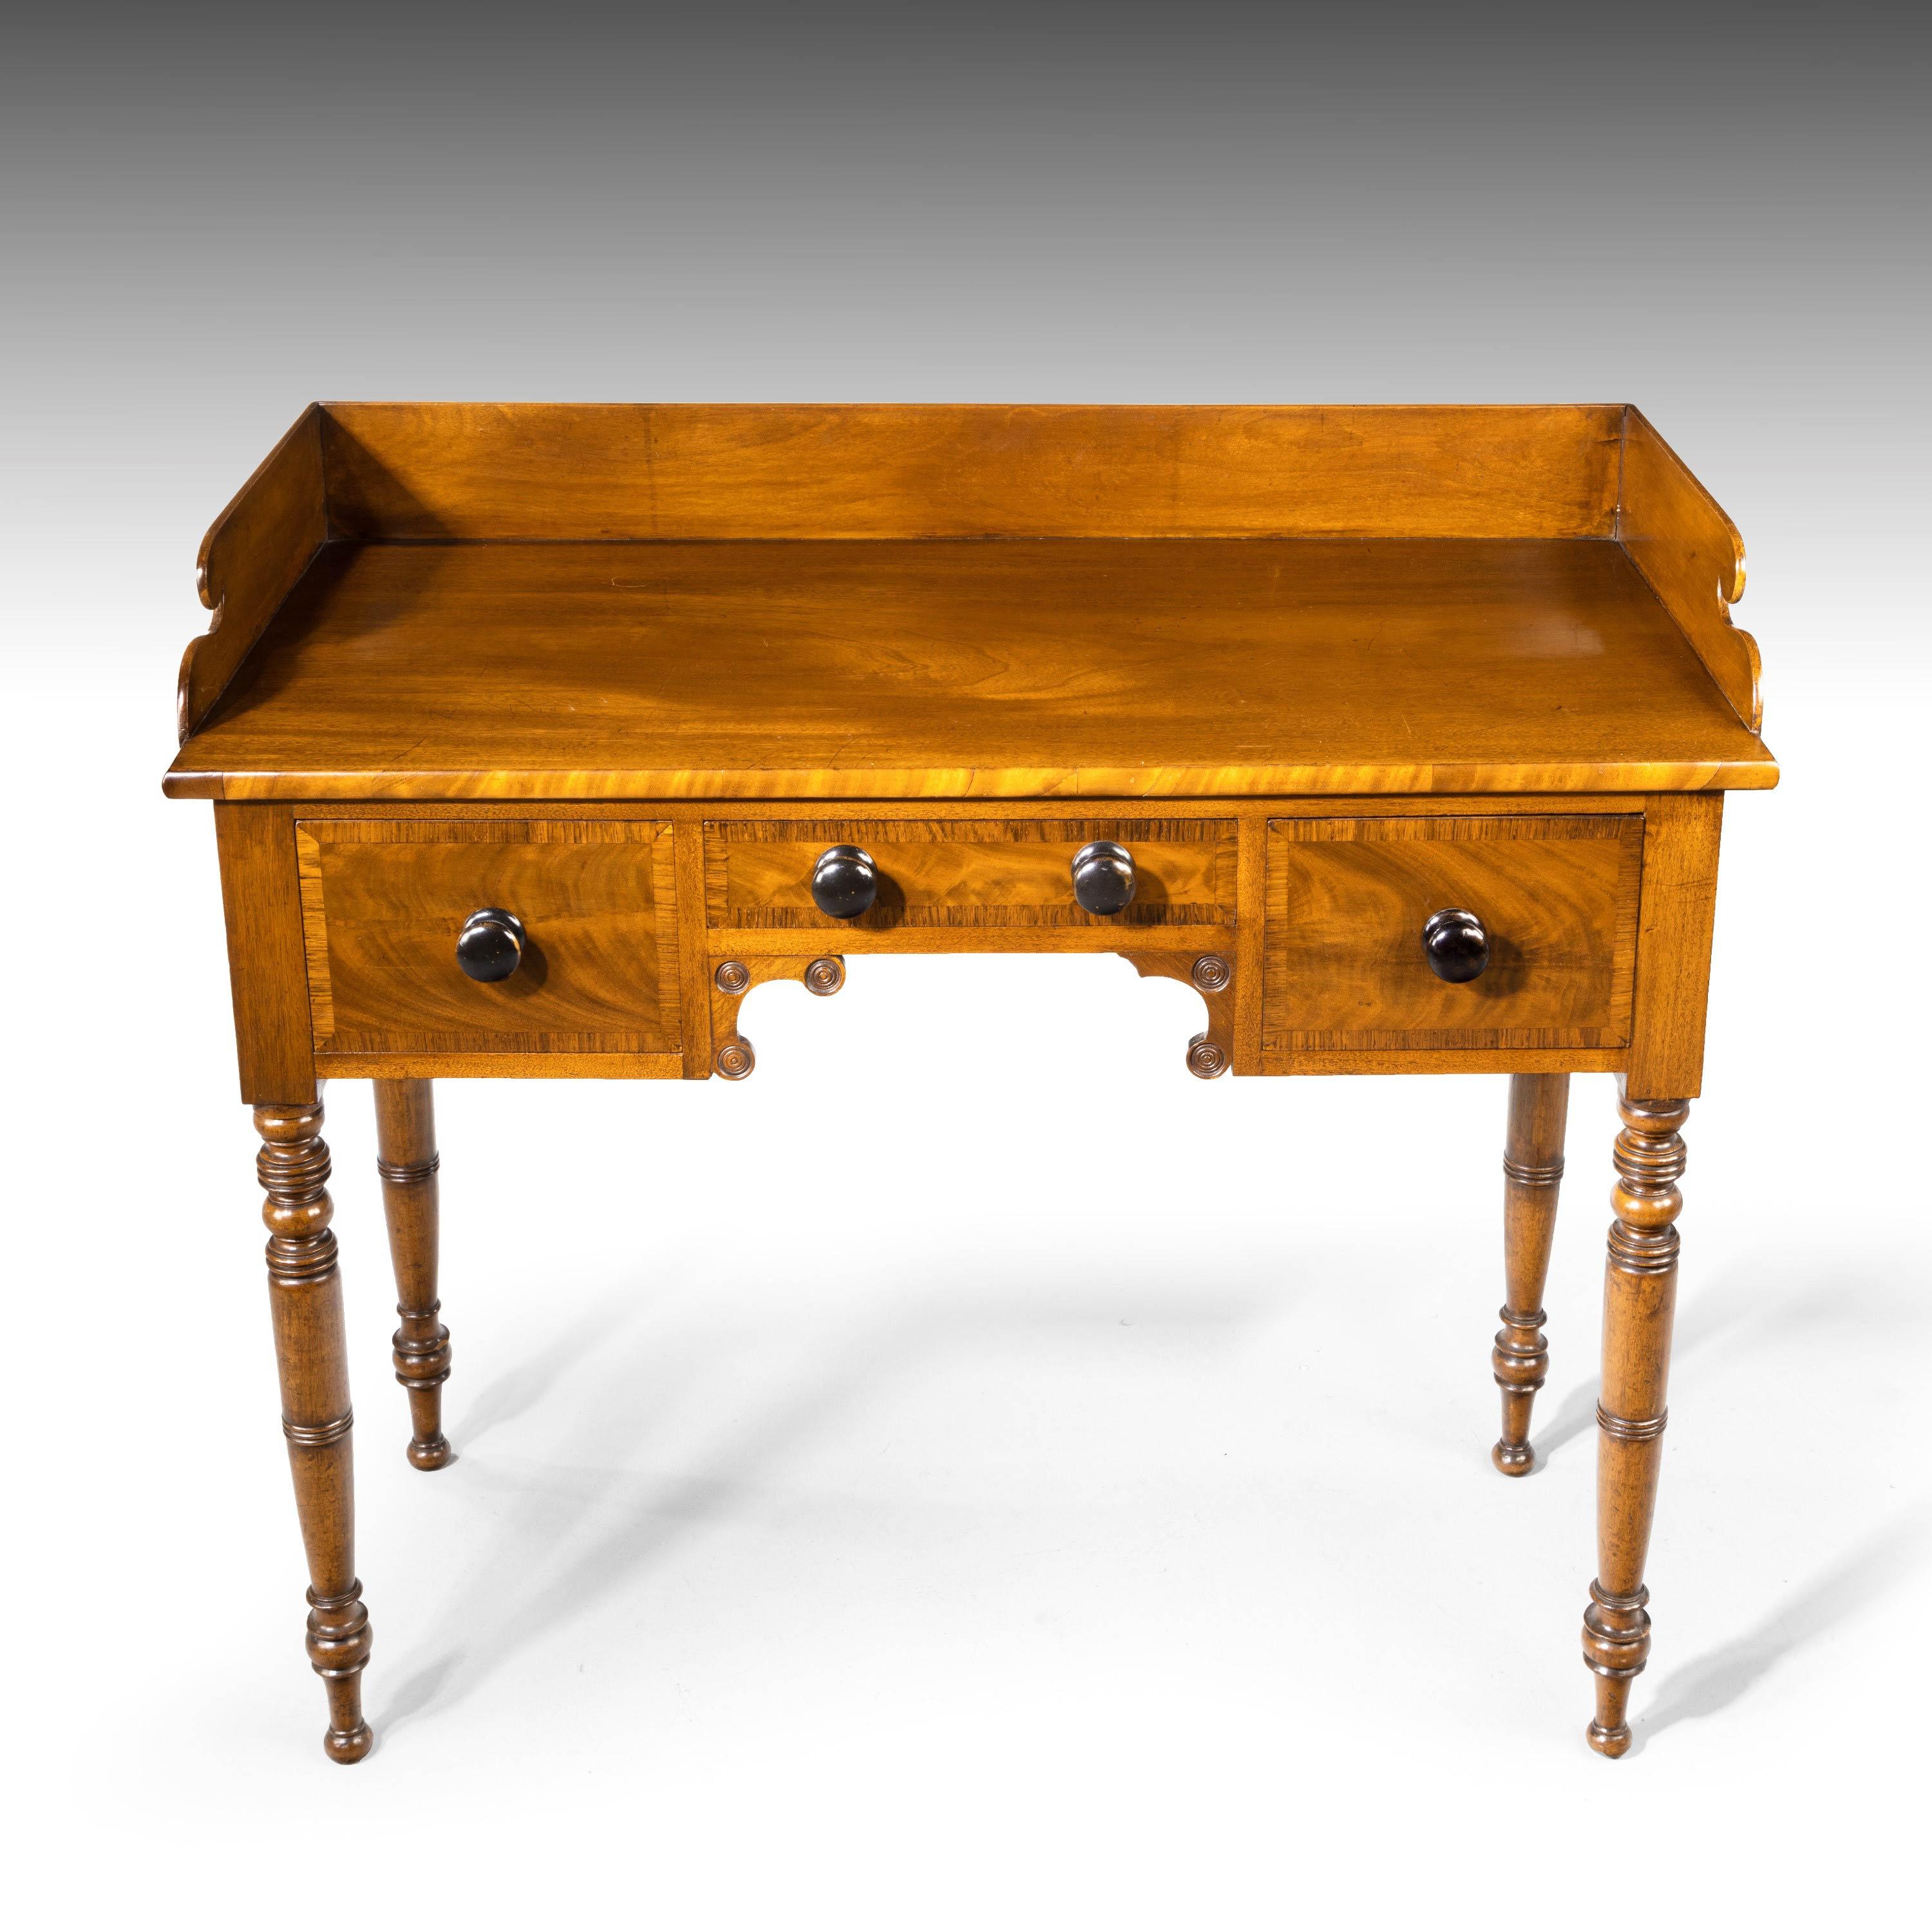 William IV Period Side or Serving Table in the Manner of Gillows 1